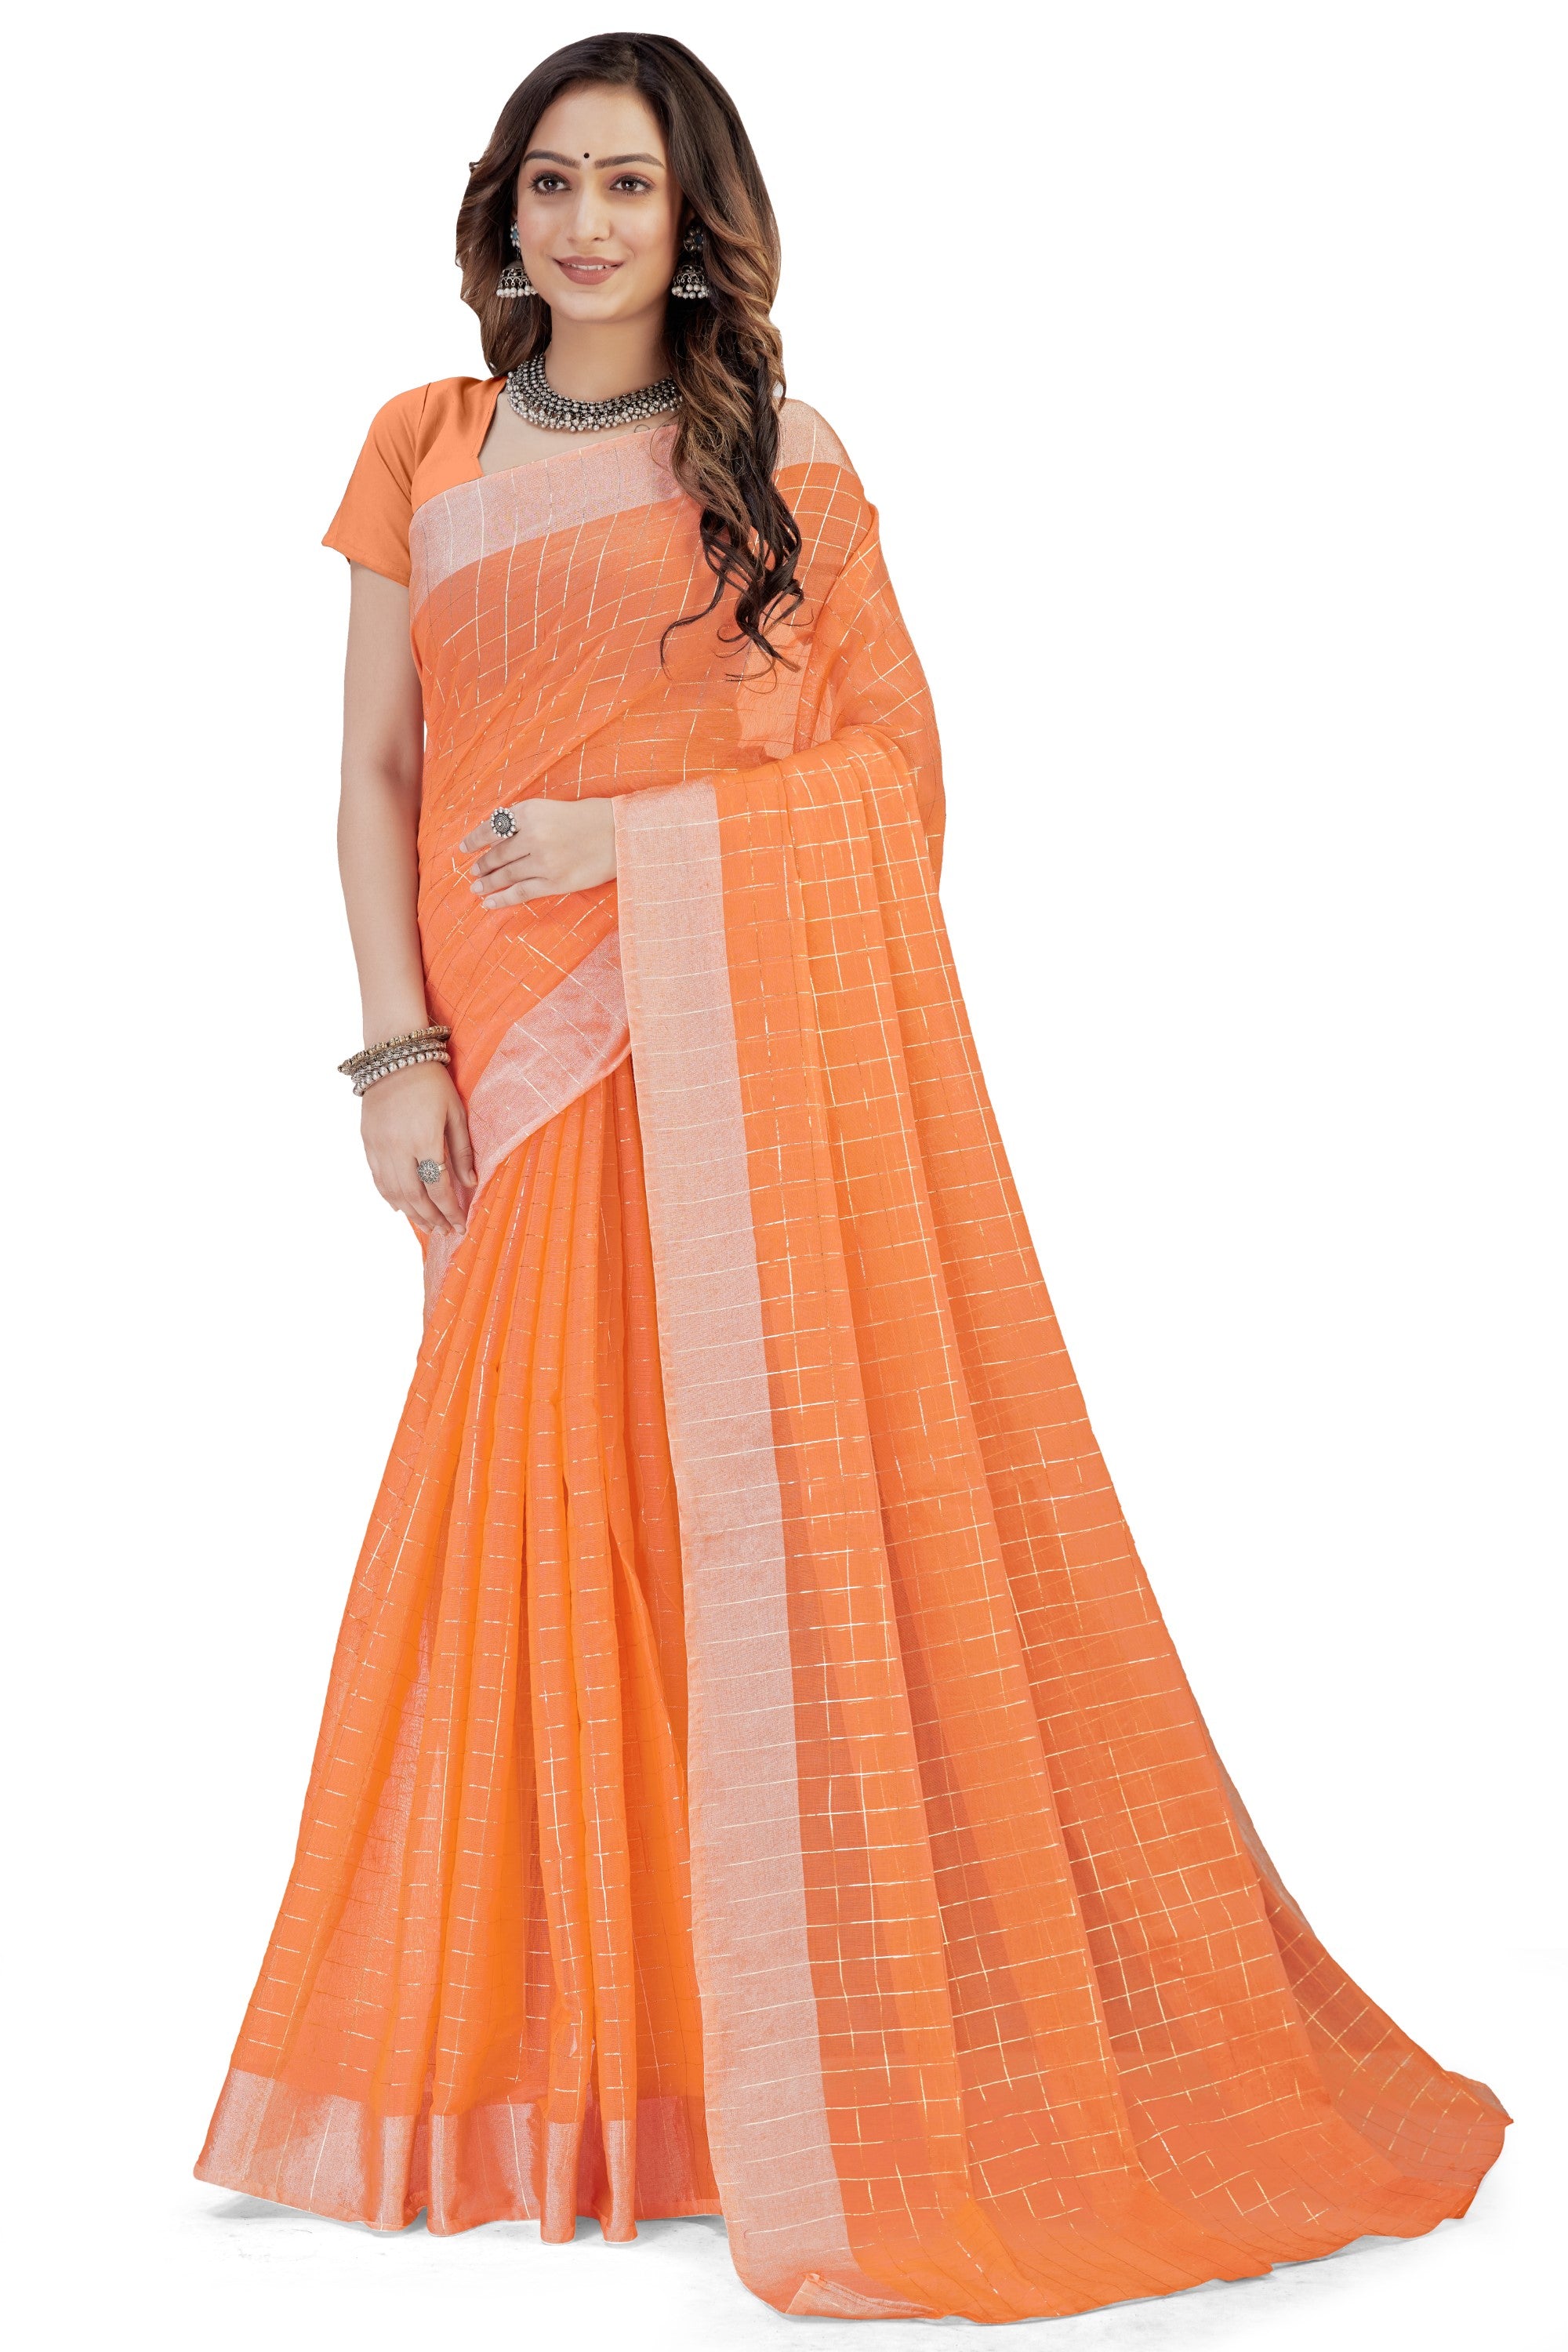 Women's self Woven Checked Daily Wear Cotton Blend Sari With Blouse Piece (Orange) - NIMIDHYA